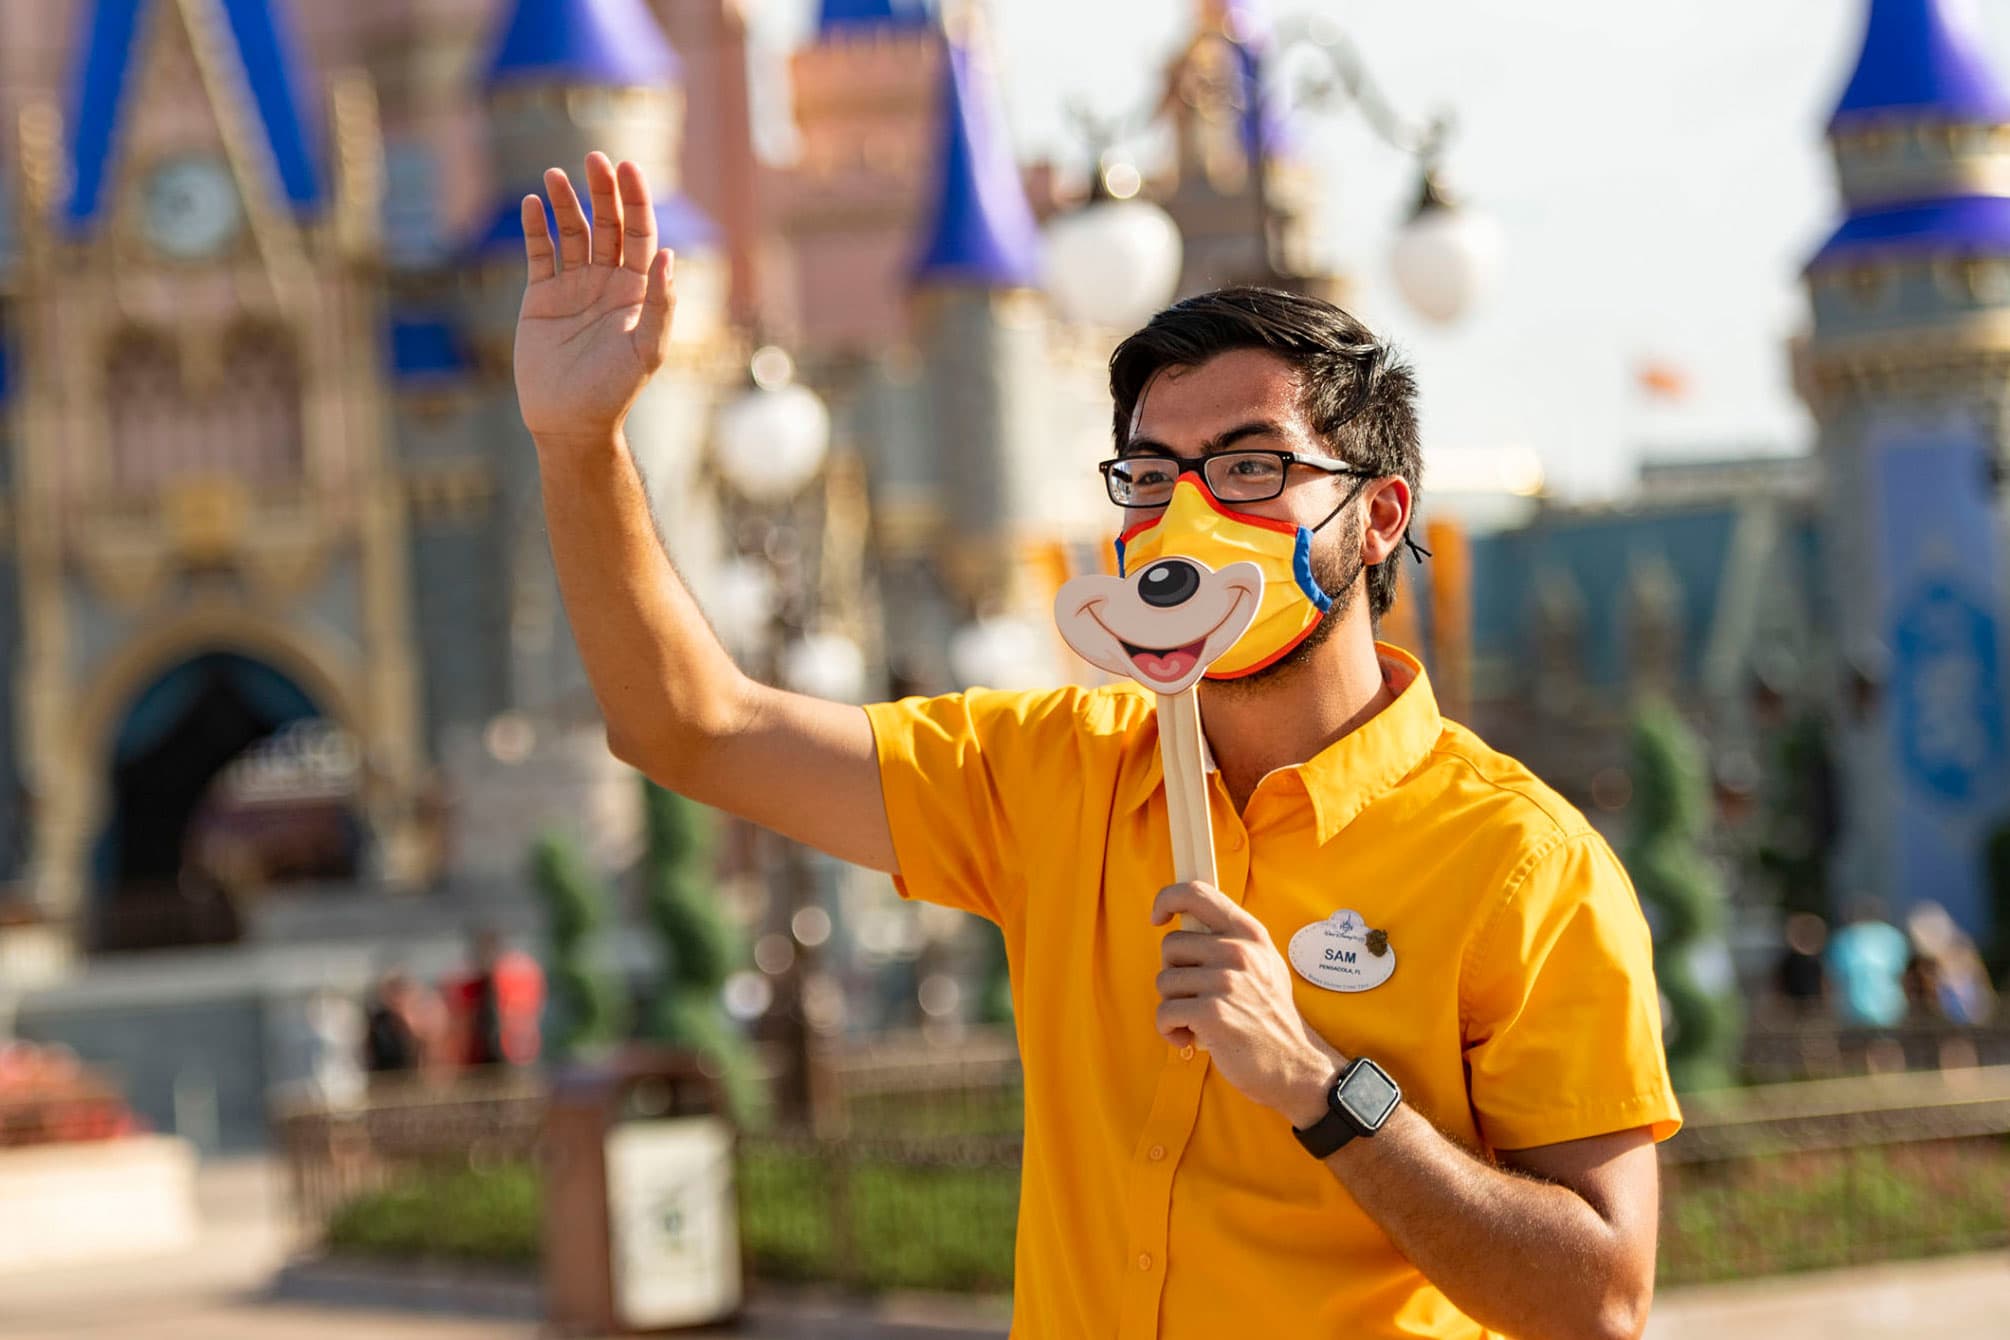 Disney’s magical pricing power can’t out ride inflation right now